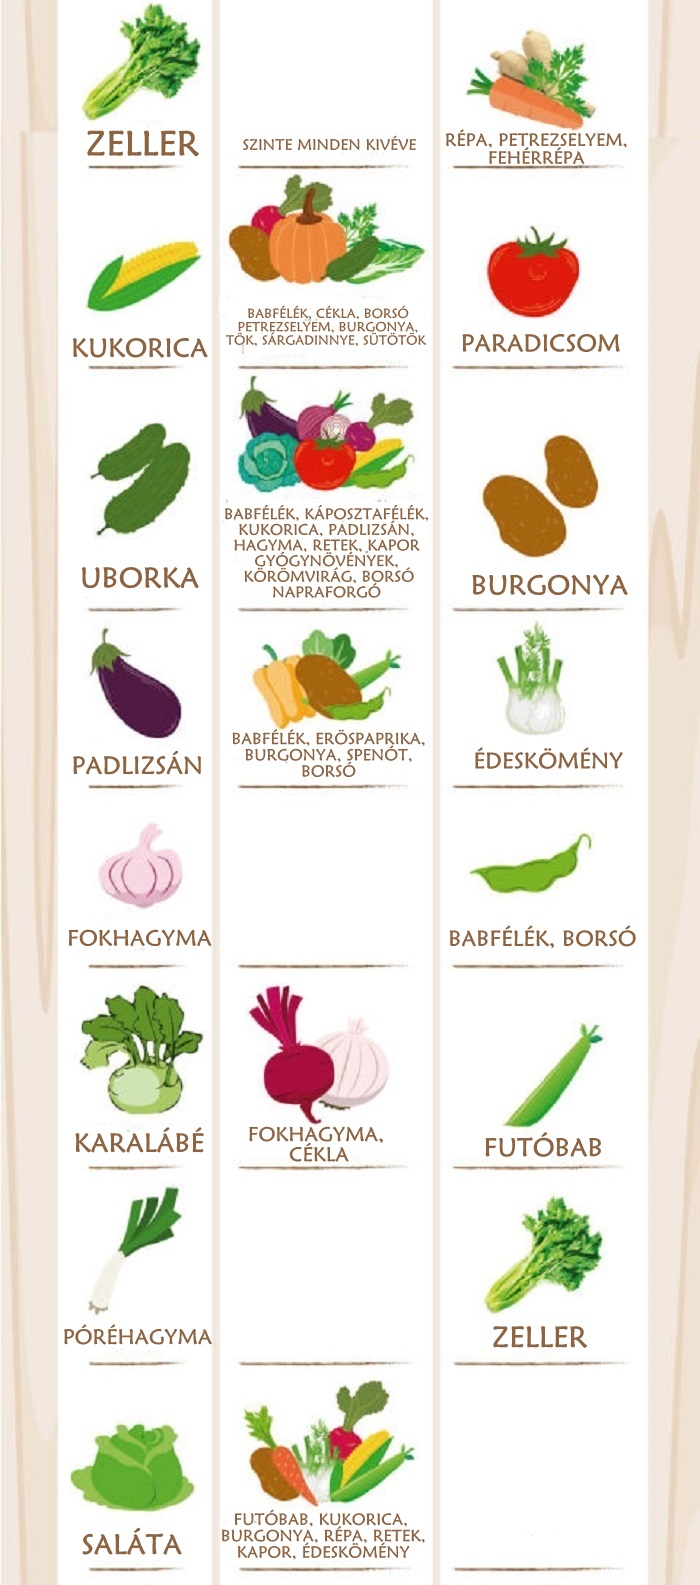 1463173582-1462900453-companion-planting-vegetable-best-friend-suggestions-infographic222